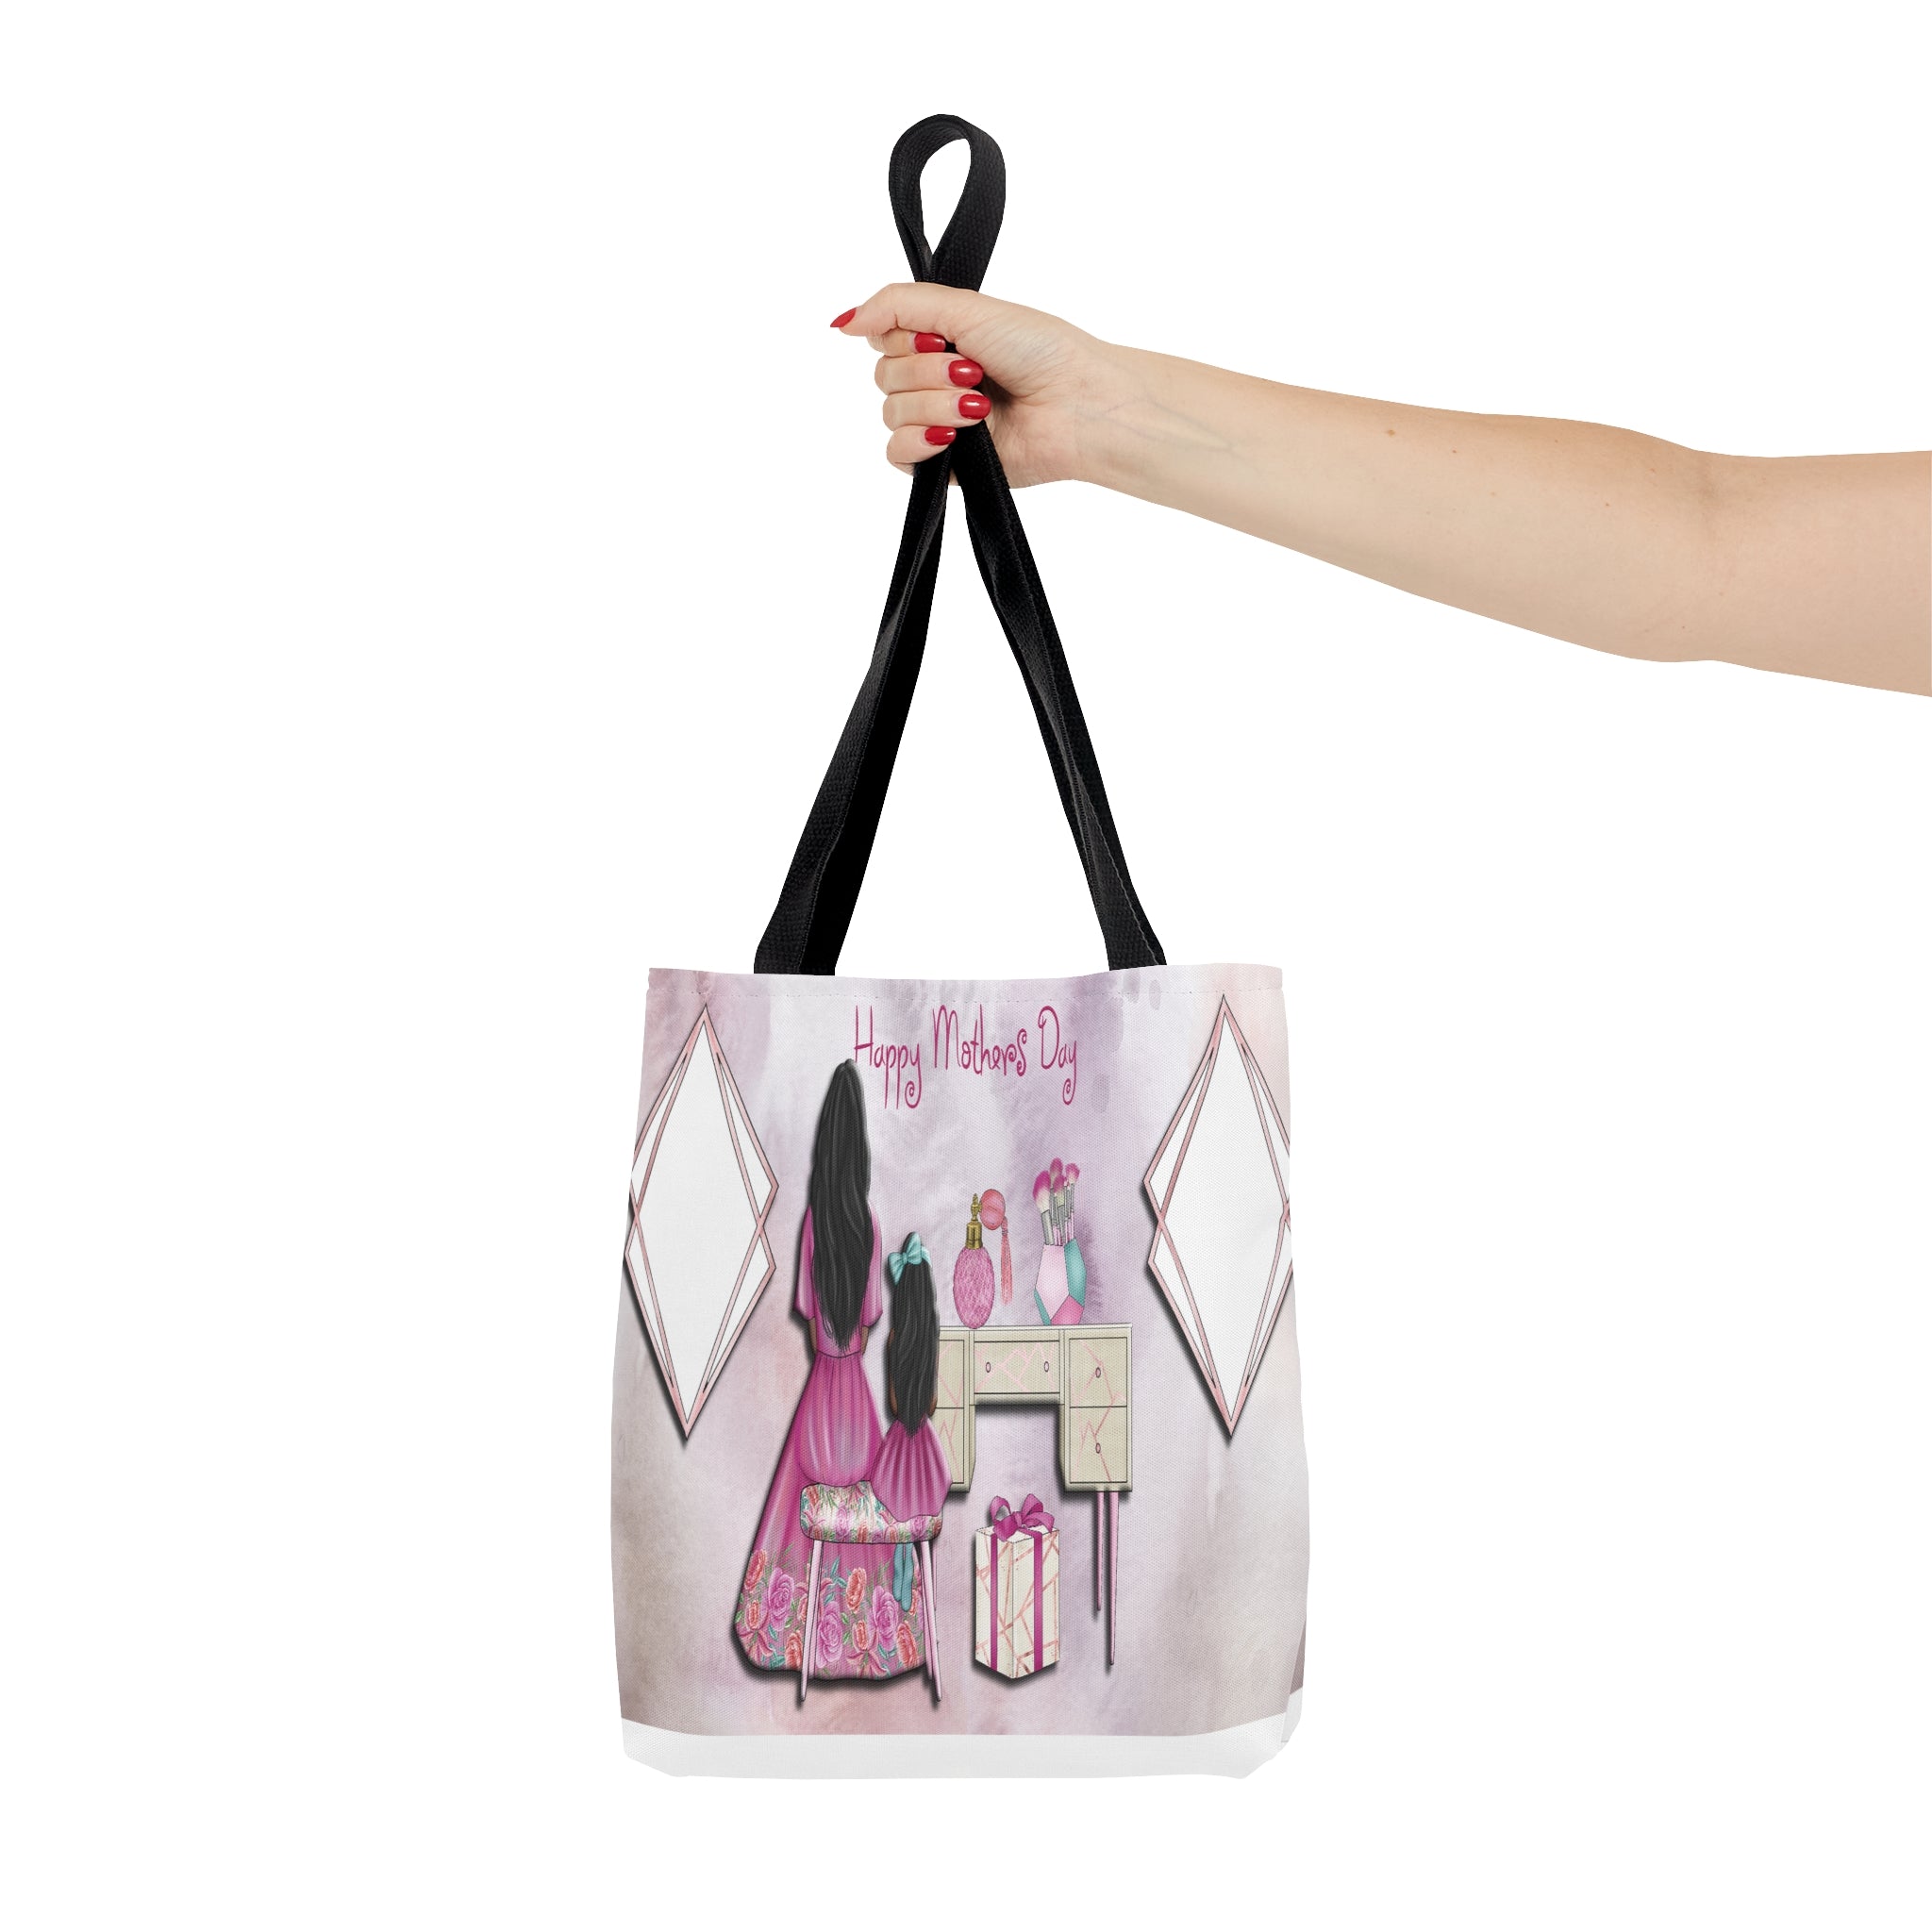 Happy Mothers Day Tote Bag (Brown Girls) (ADD A PICTURE)